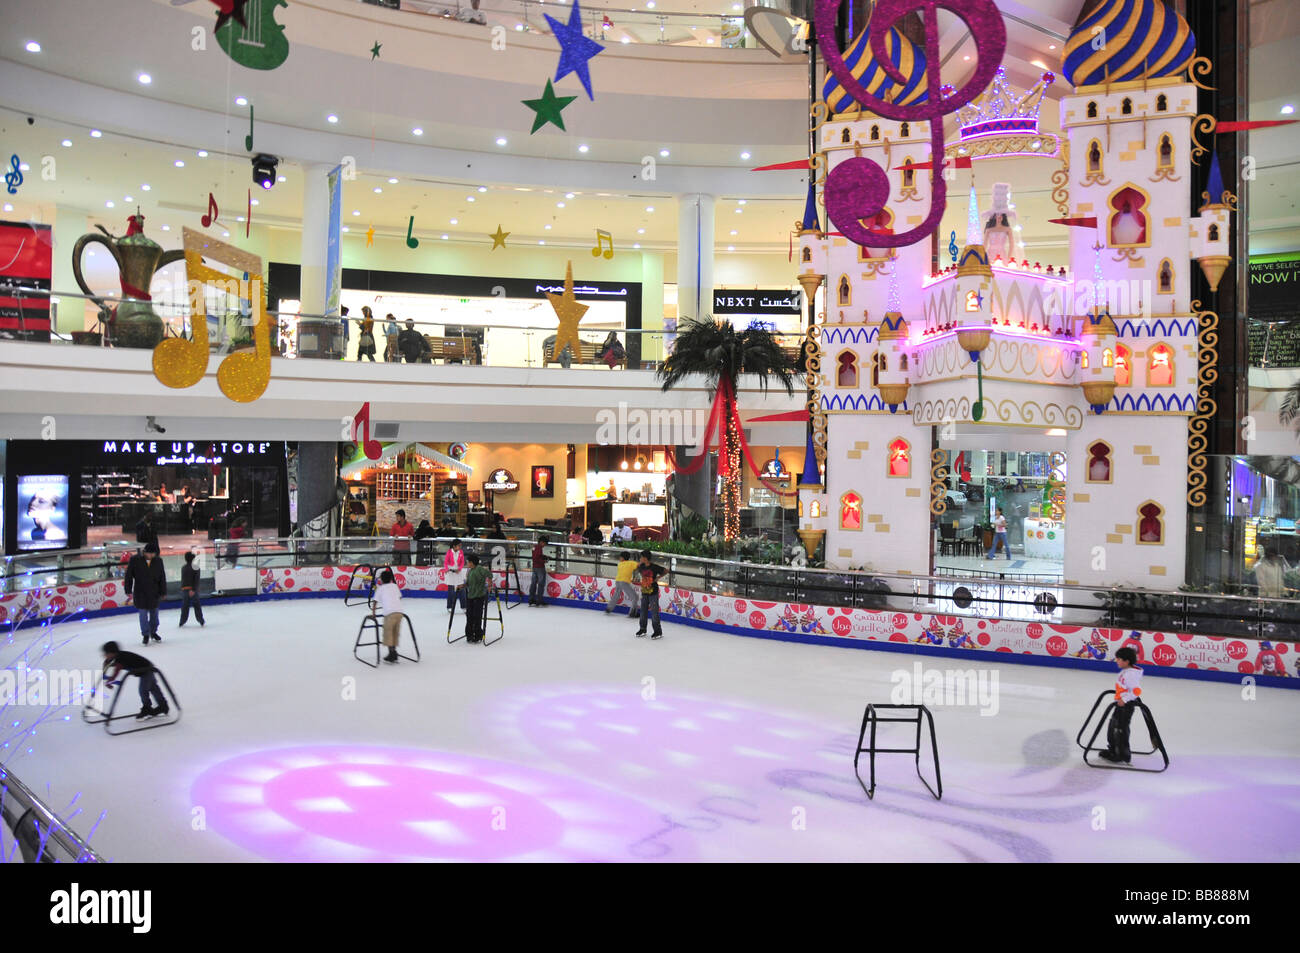 Children on the ice rink of the Al-Ain-Mall, Al Ain, Abu Dhabi, United Arab Emirates, Arabia, Orient, Middle East Stock Photo